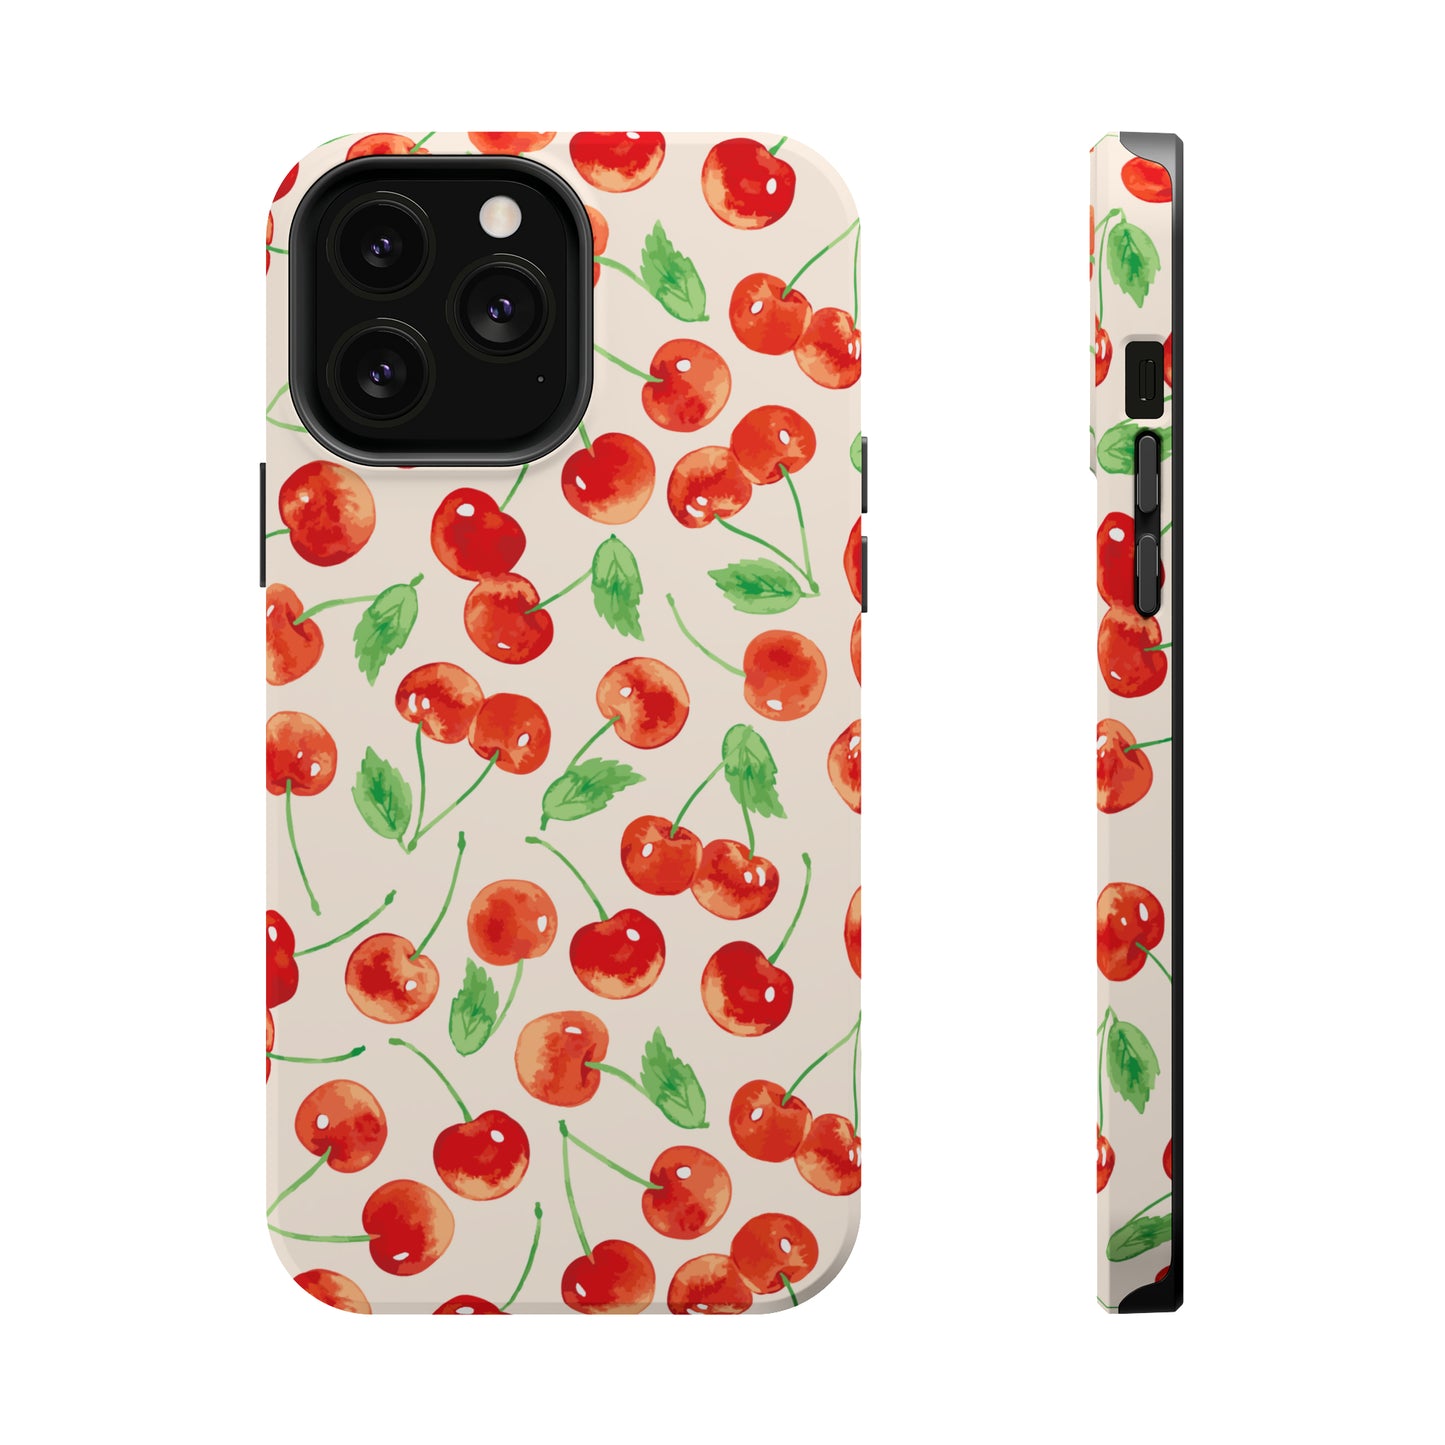 Cheeky Cherries - MagSafe Tough iPhone Case